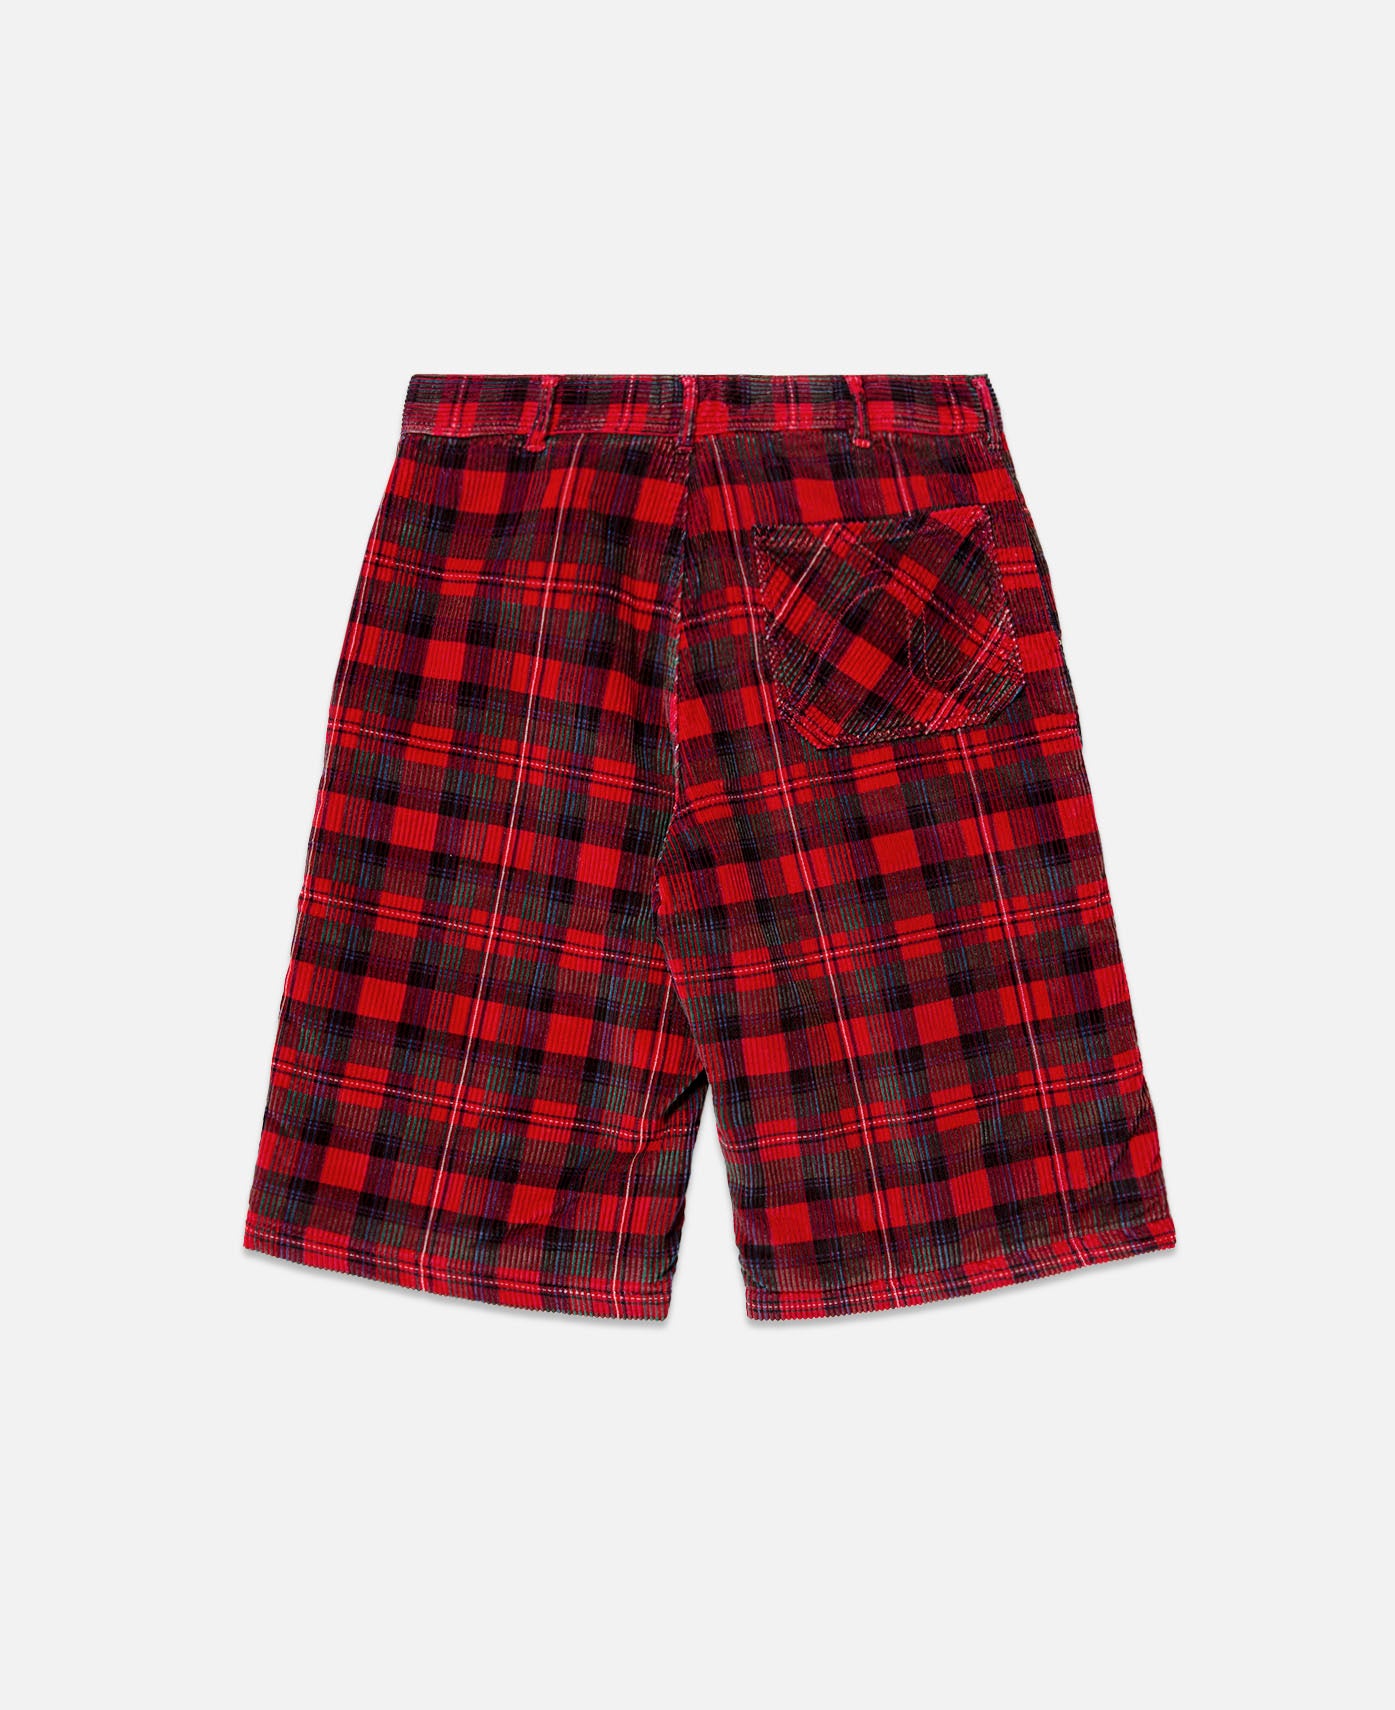 ERL - Unisex Plaid Corduroy Woven Shorts (Red) – JUICESTORE